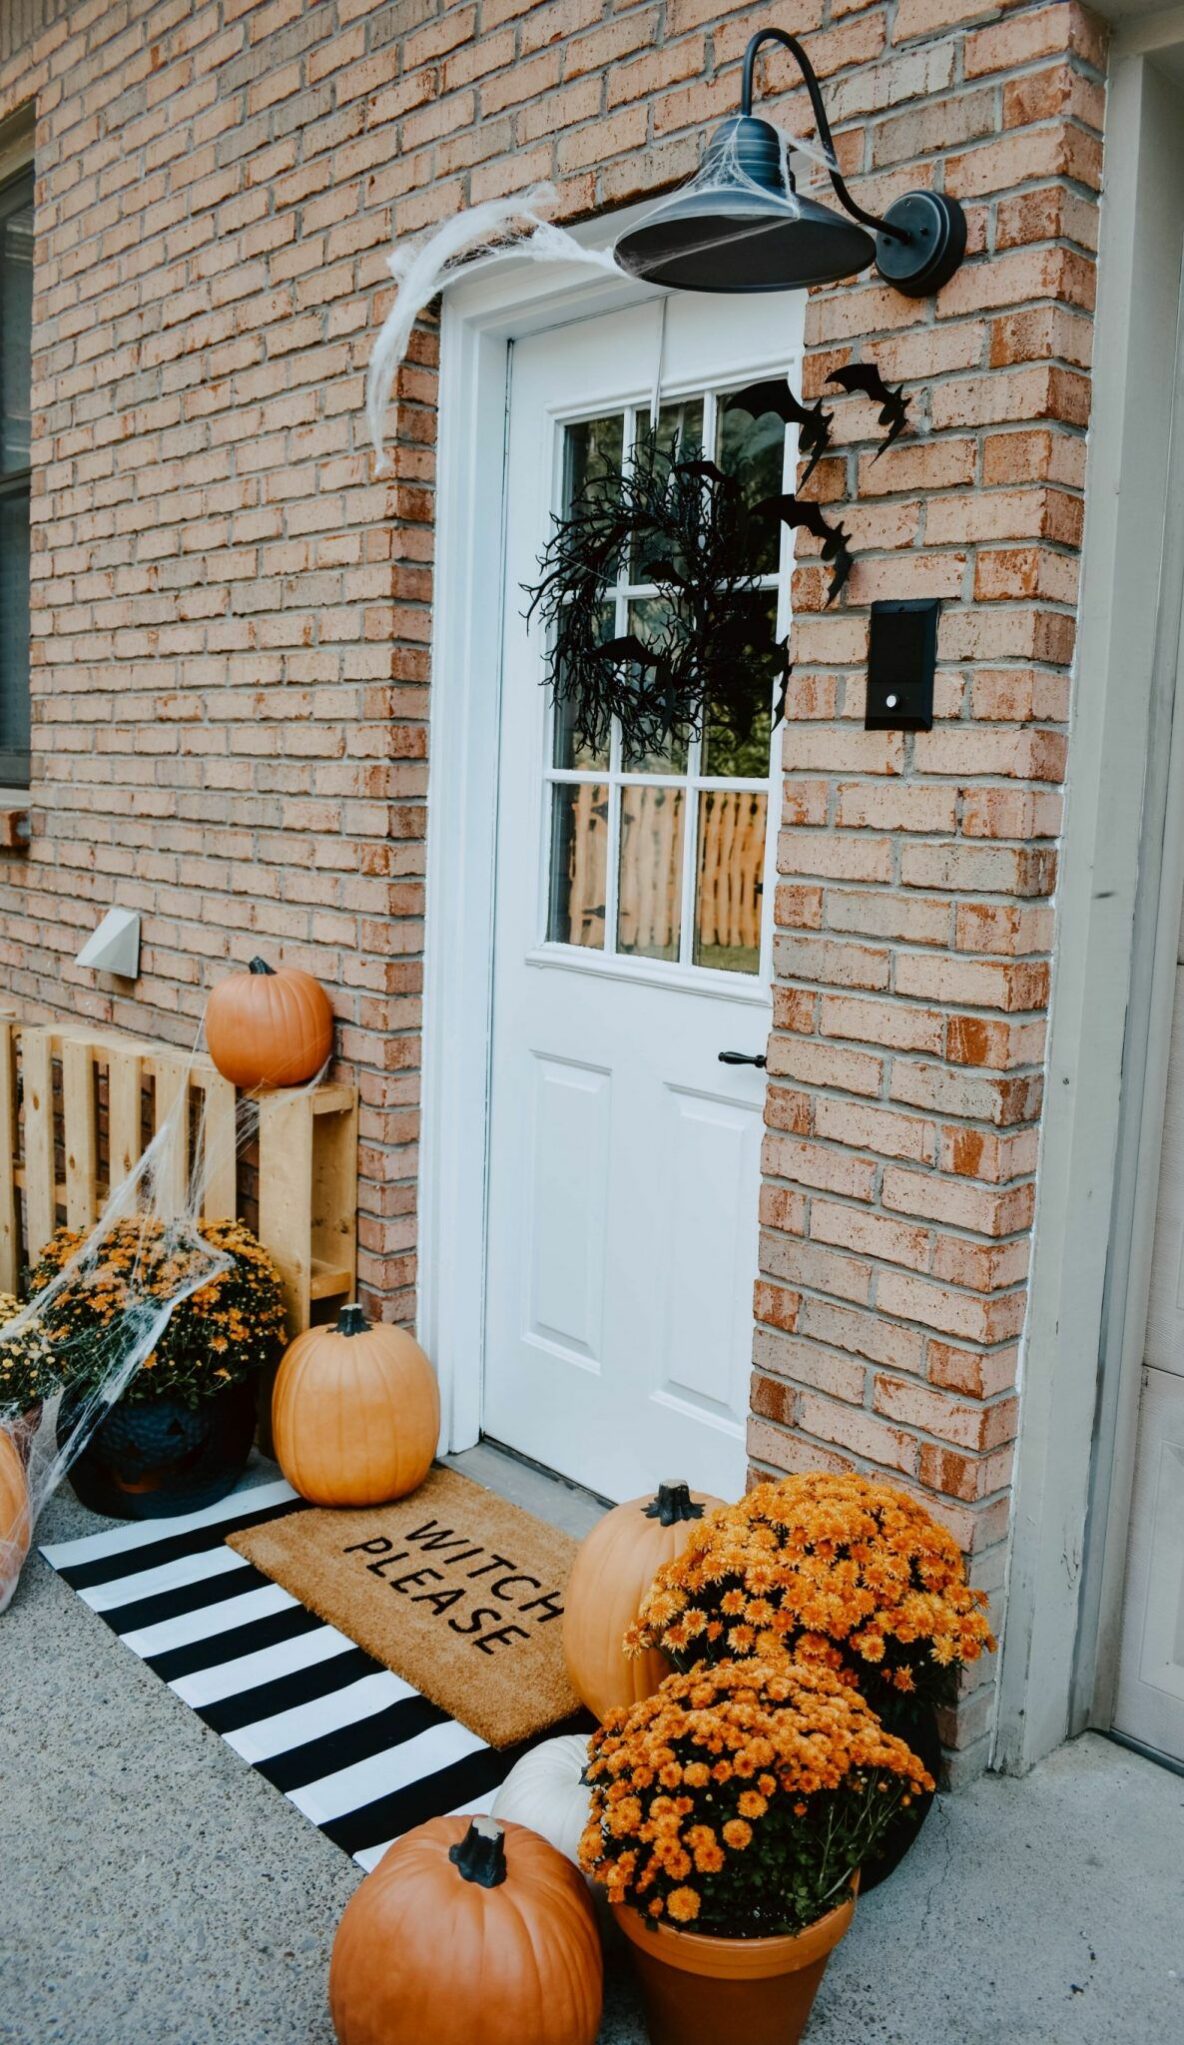 6 Cozy and Inviting Fall Porch Ideas - HV Design Group